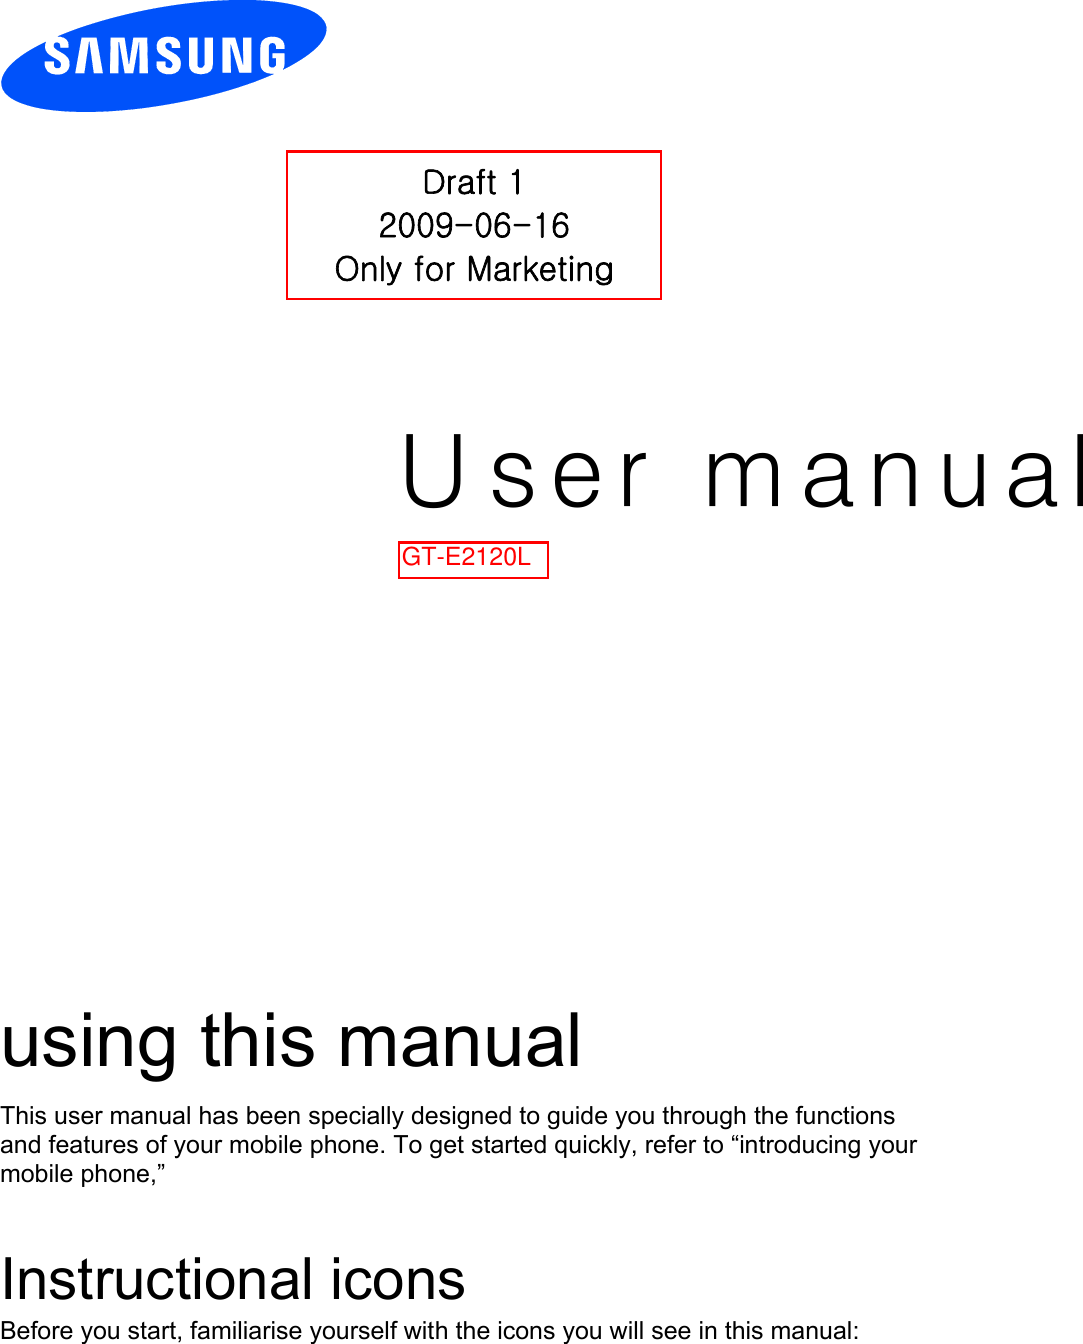 User manual%2#*using this manual This user manual has been specially designed to guide you through the functions and features of your mobile phone. To get started quickly, refer to “introducing your mobile phone,”  Instructional icons Before you start, familiarise yourself with the icons you will see in this manual:   Draft 1 2009-06-16 Only for Marketing GT-E2120L